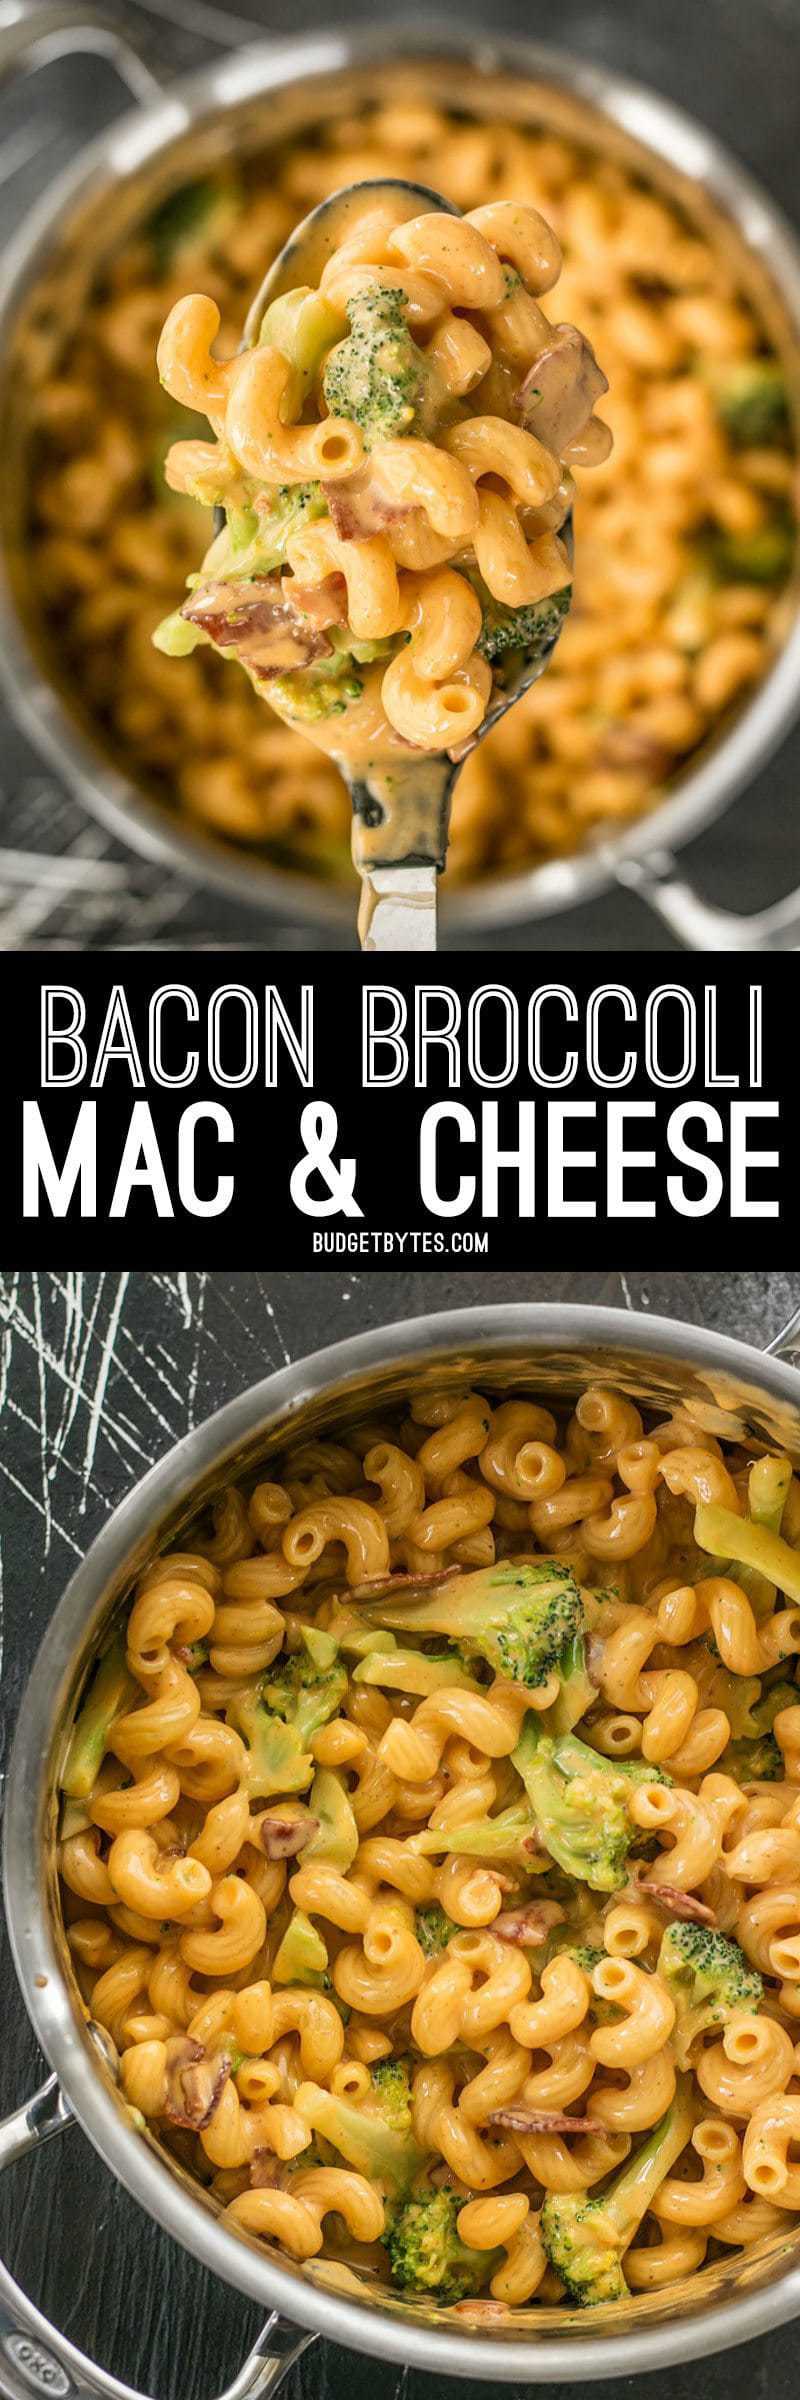 This One Pot Bacon Broccoli Mac and Cheese is fast, easy, and absolutely fool proof. This sauce stays smooth and creamy! BudgetBytes.com